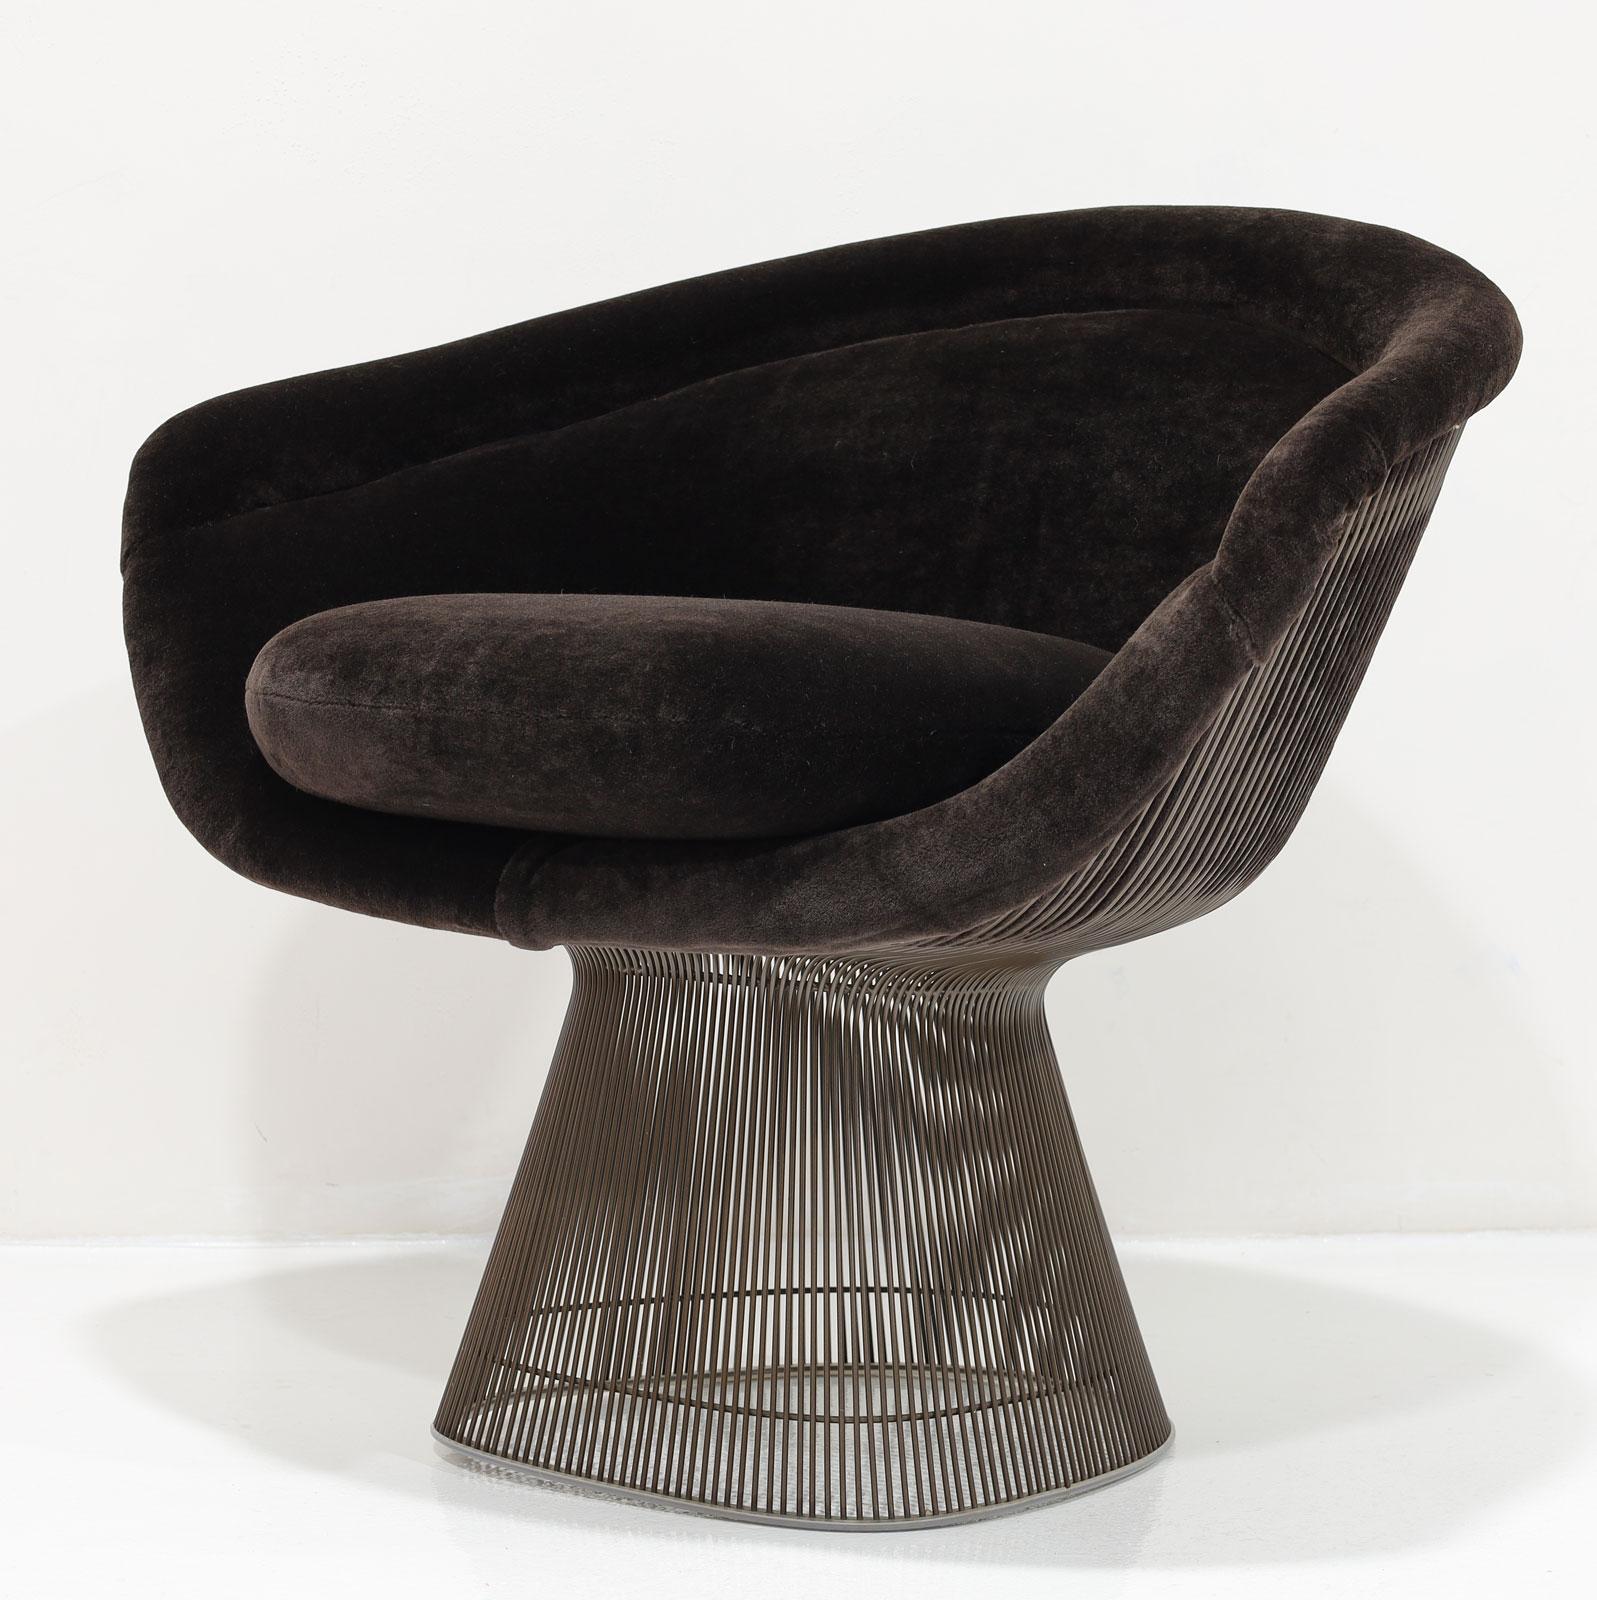 20th Century Warren Platner for Knoll Bronze Frame Lounge Chair in Holly Hunt Mohair For Sale